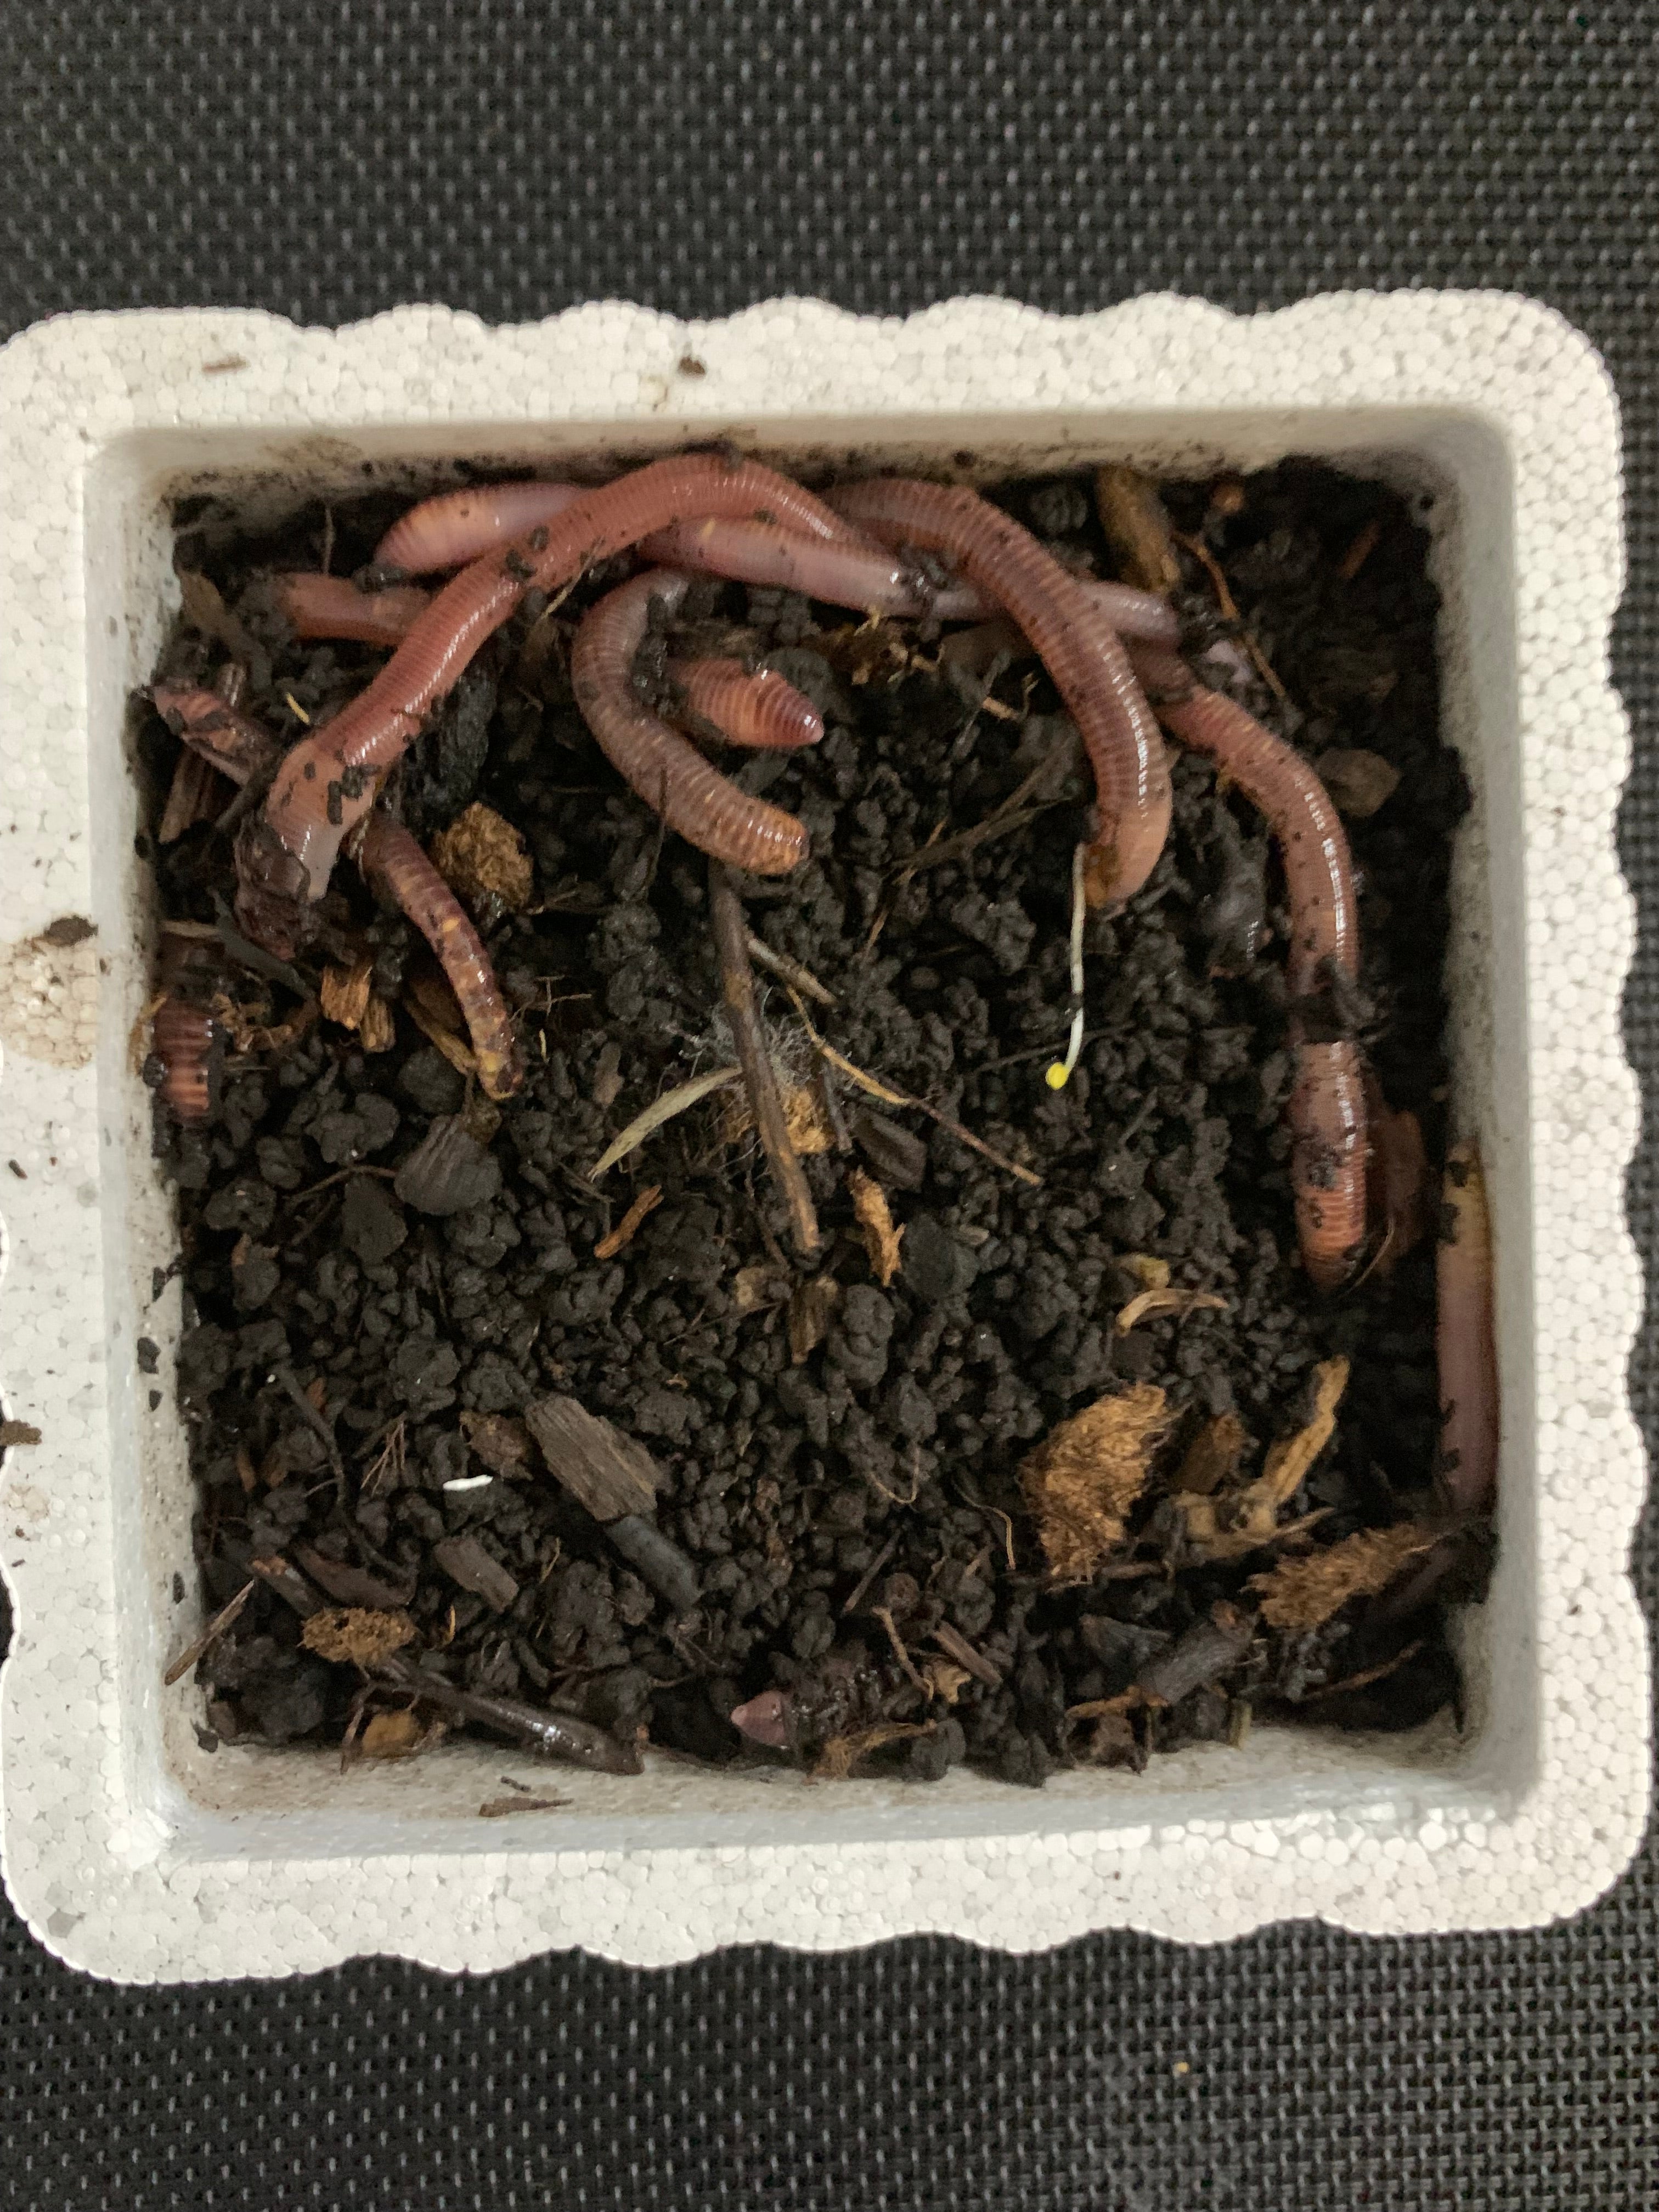 Large Canadian Troutworms - (Red Wigglers) - 2 Dozen